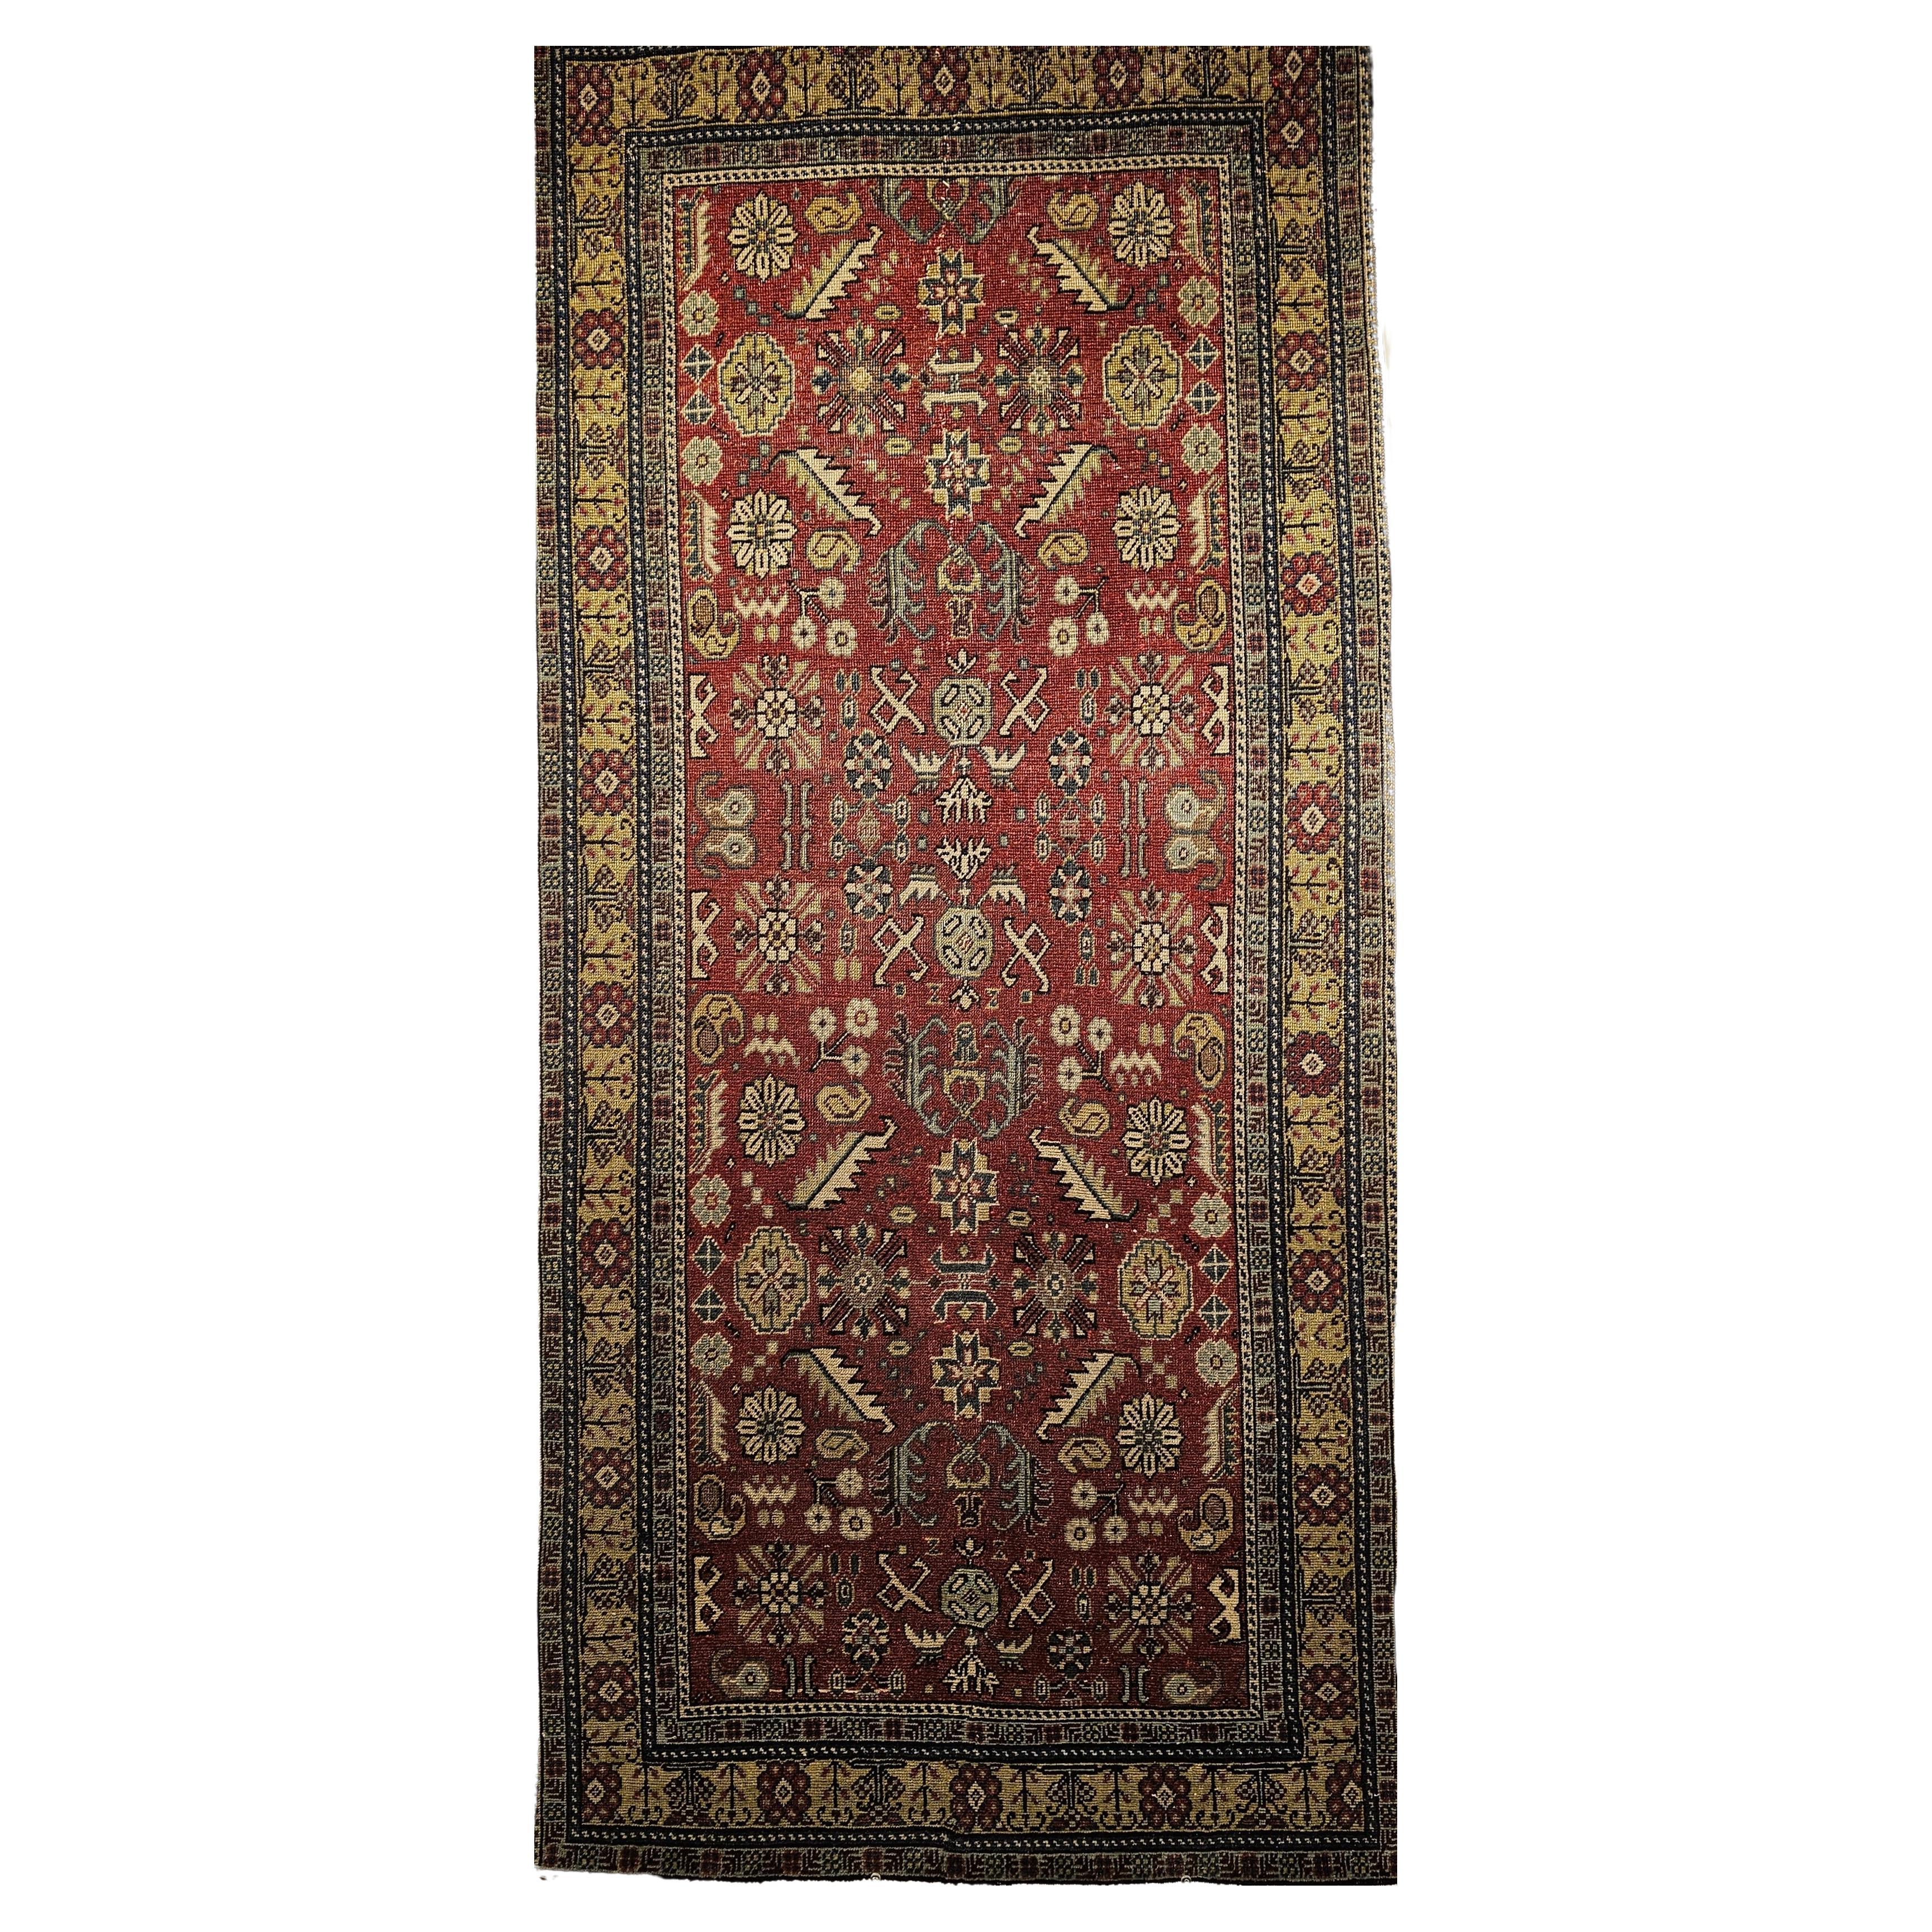 Vintage Khotan Area Rug in Allover Geometric Pattern on Brick Red, Yellow, Ivory For Sale